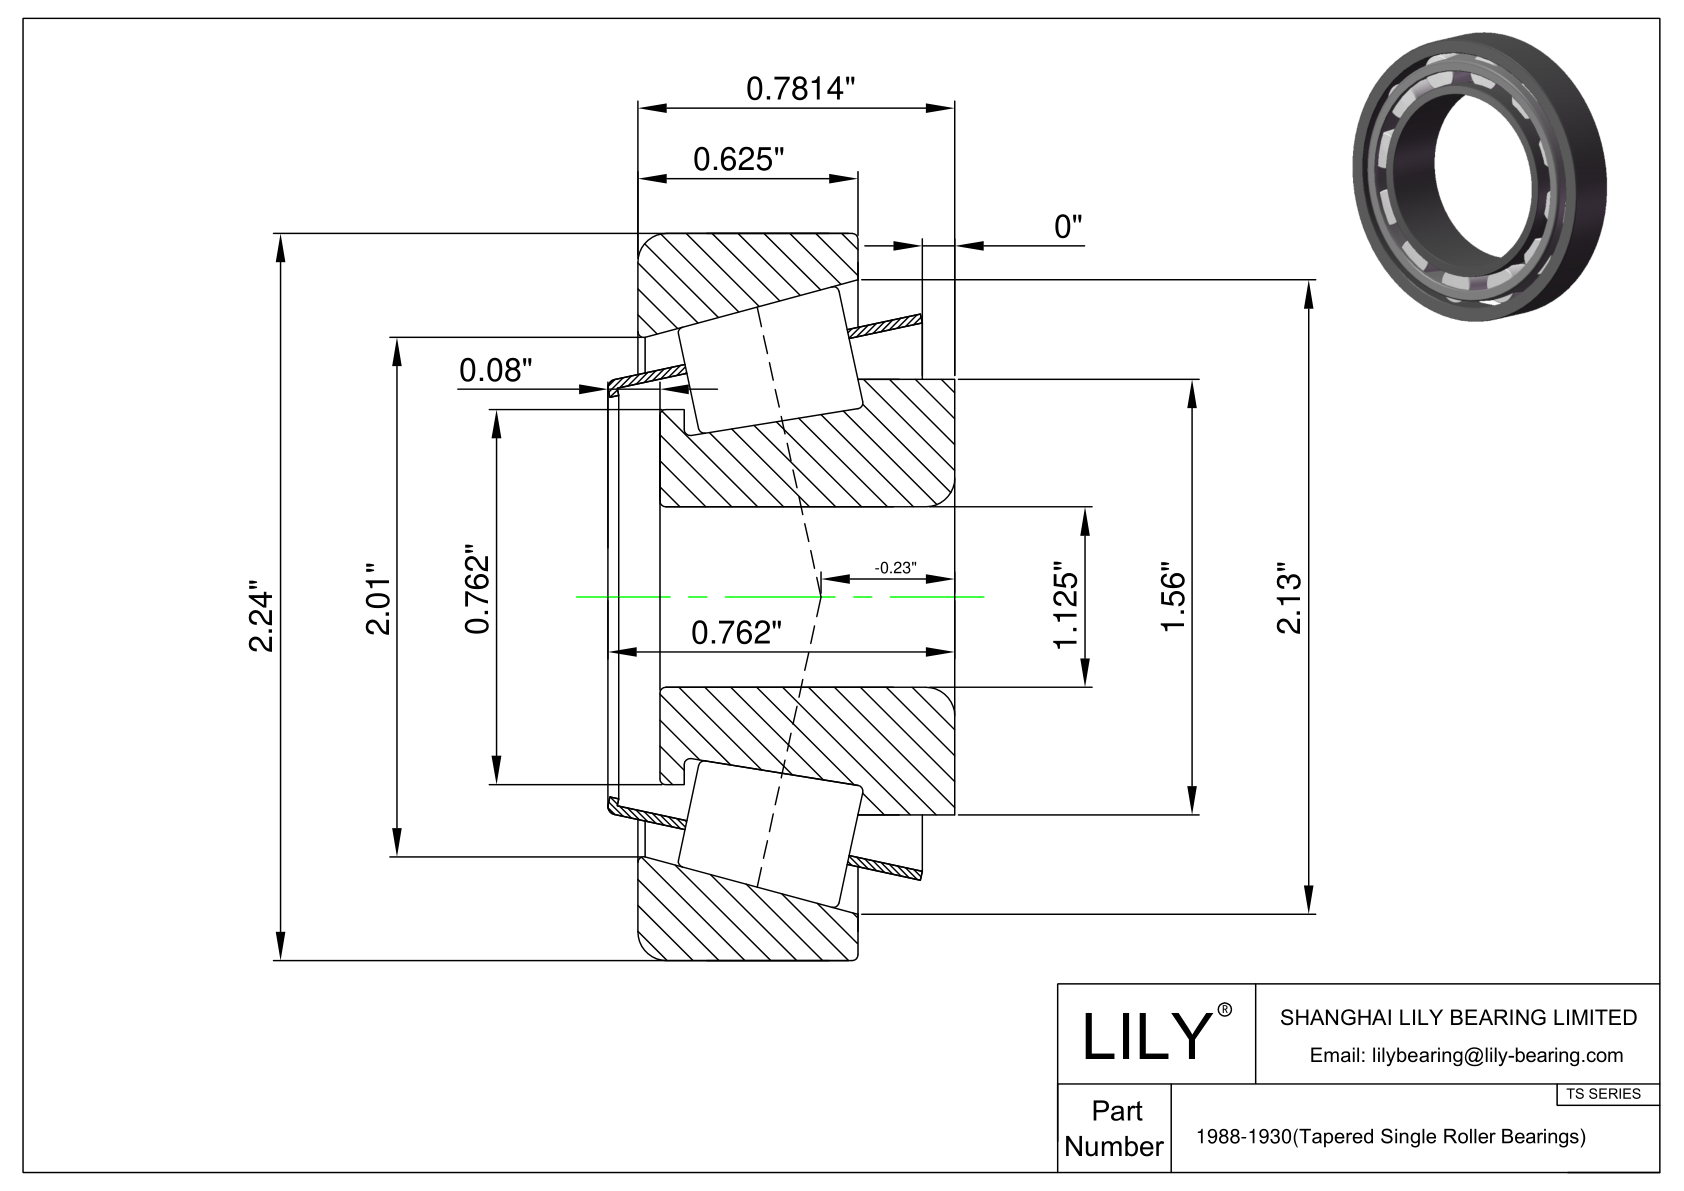 1988-1930 TS (Tapered Single Roller Bearings) (Imperial) cad drawing